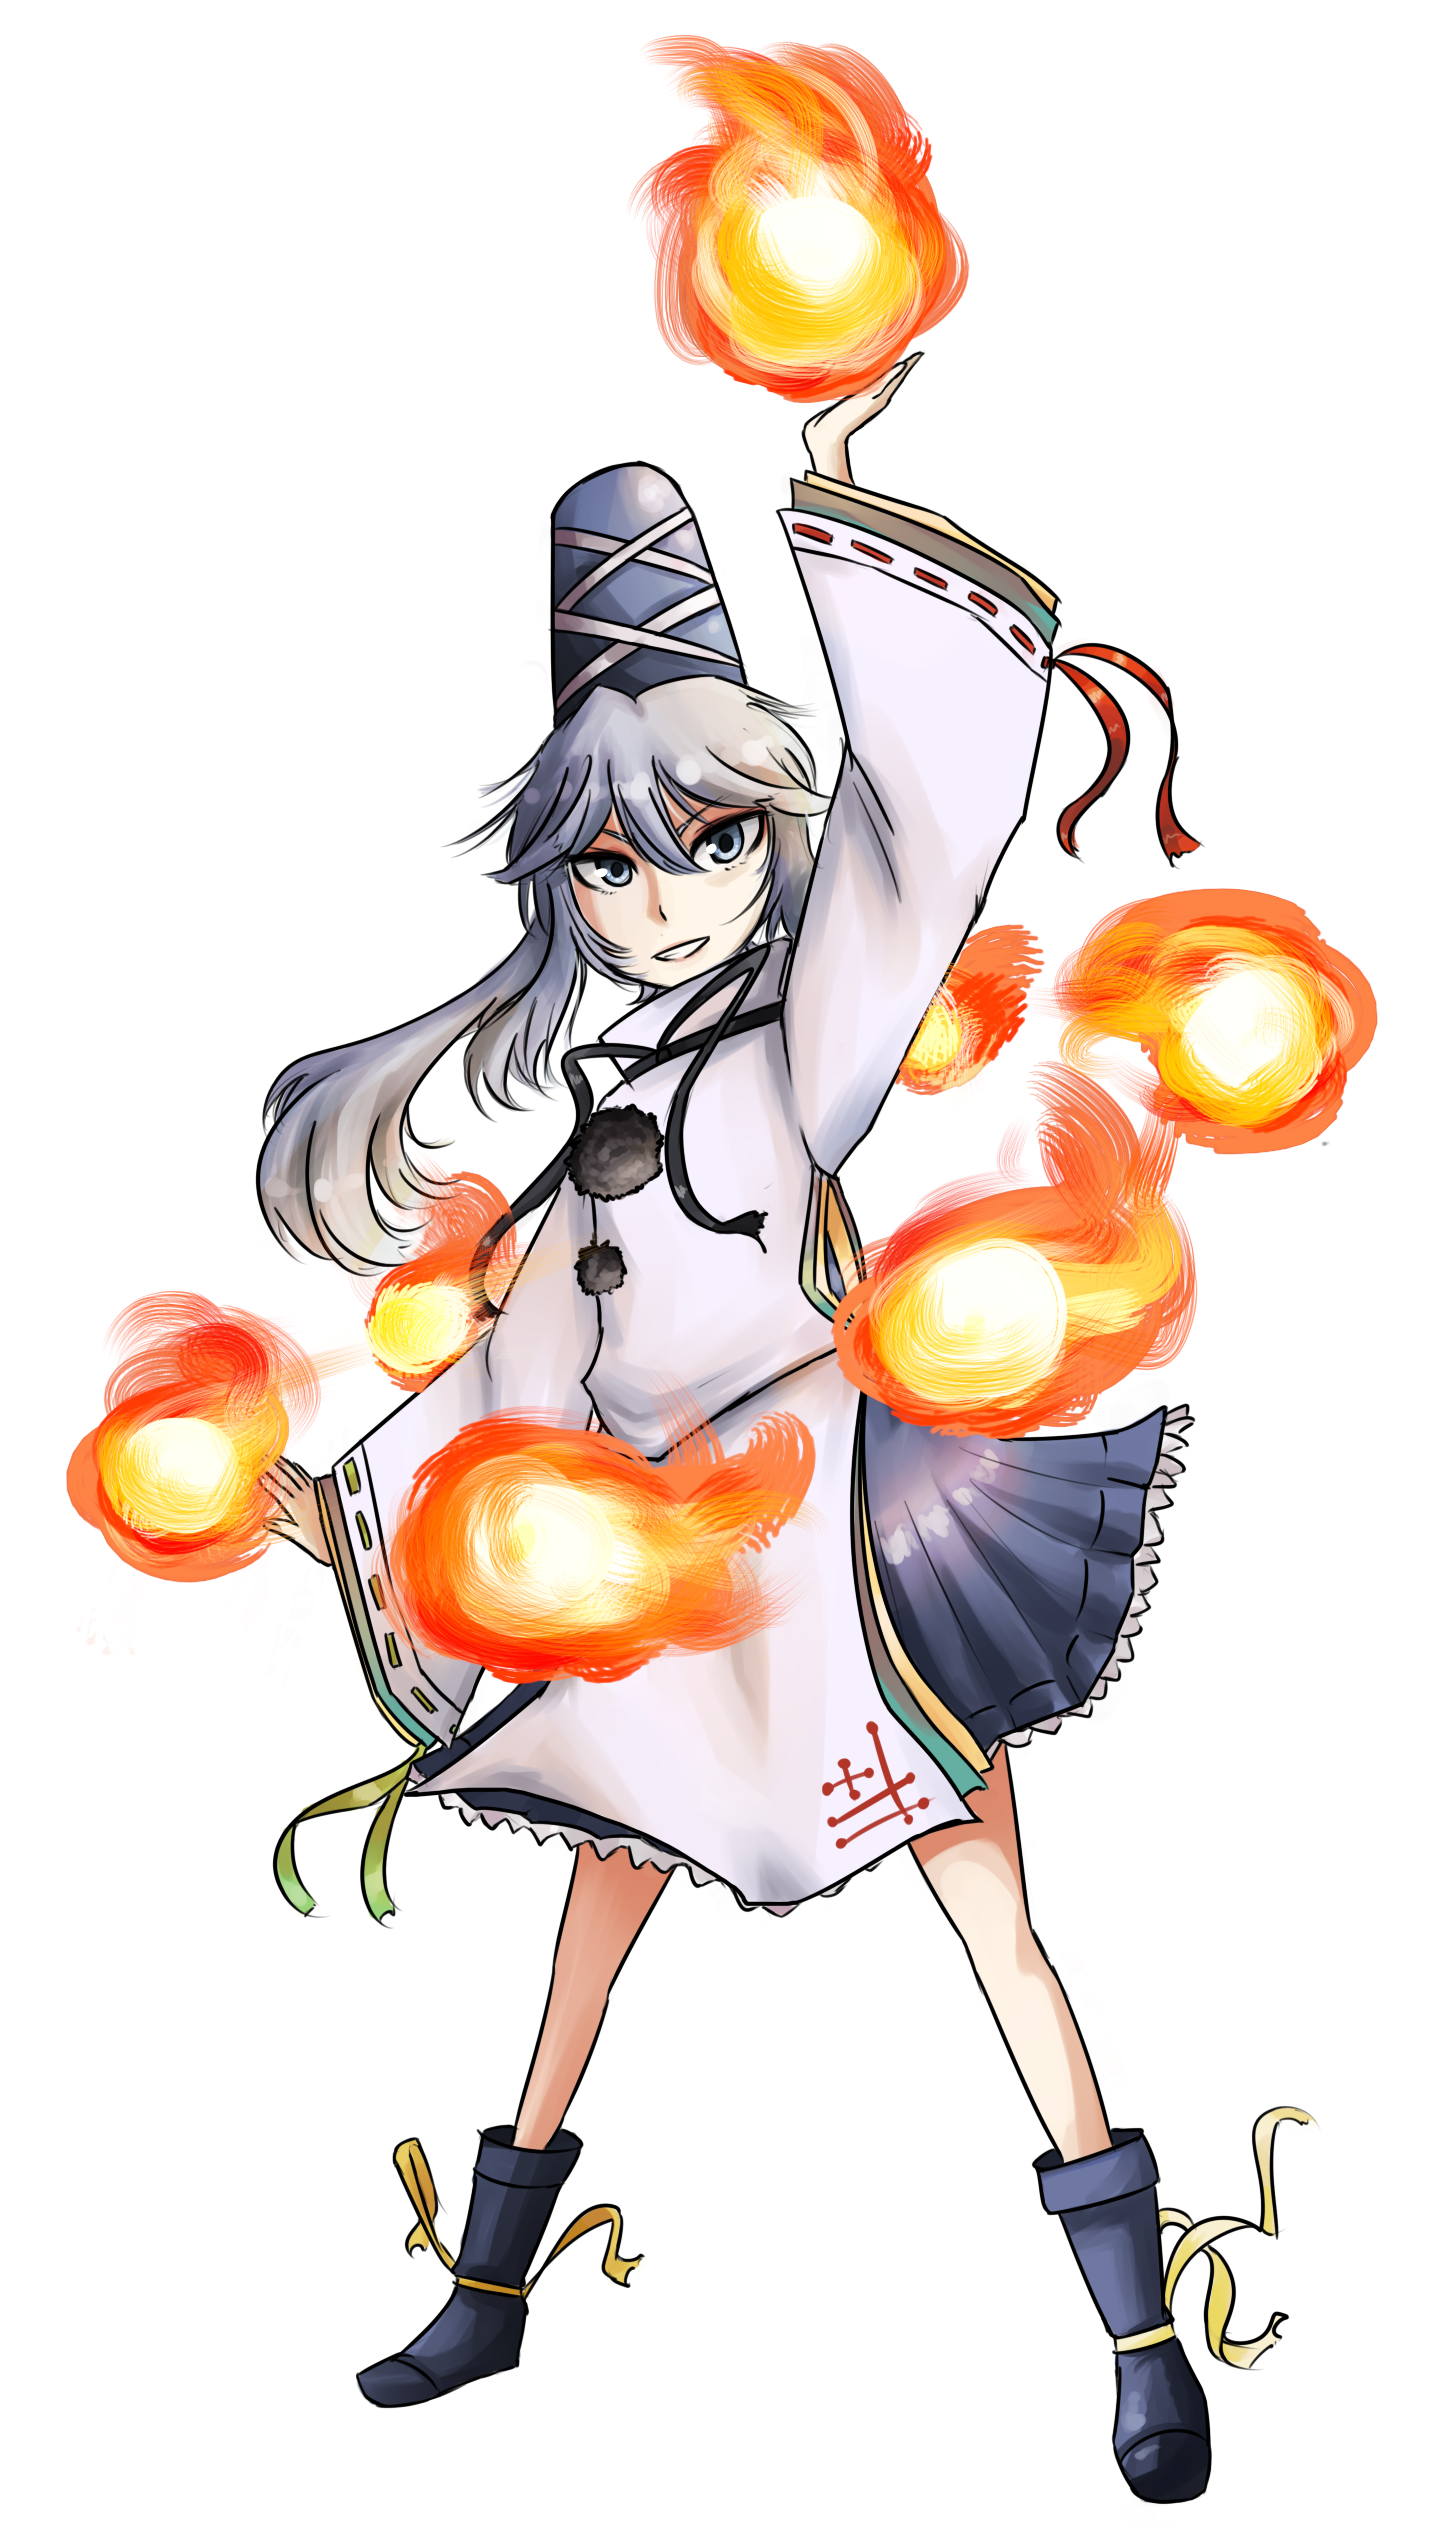 Cereal's Touhou fan-art - Pagina 6 Blaze_sign___sakuraiji_in_flames_by_cryogeniccereal-d7lt82x